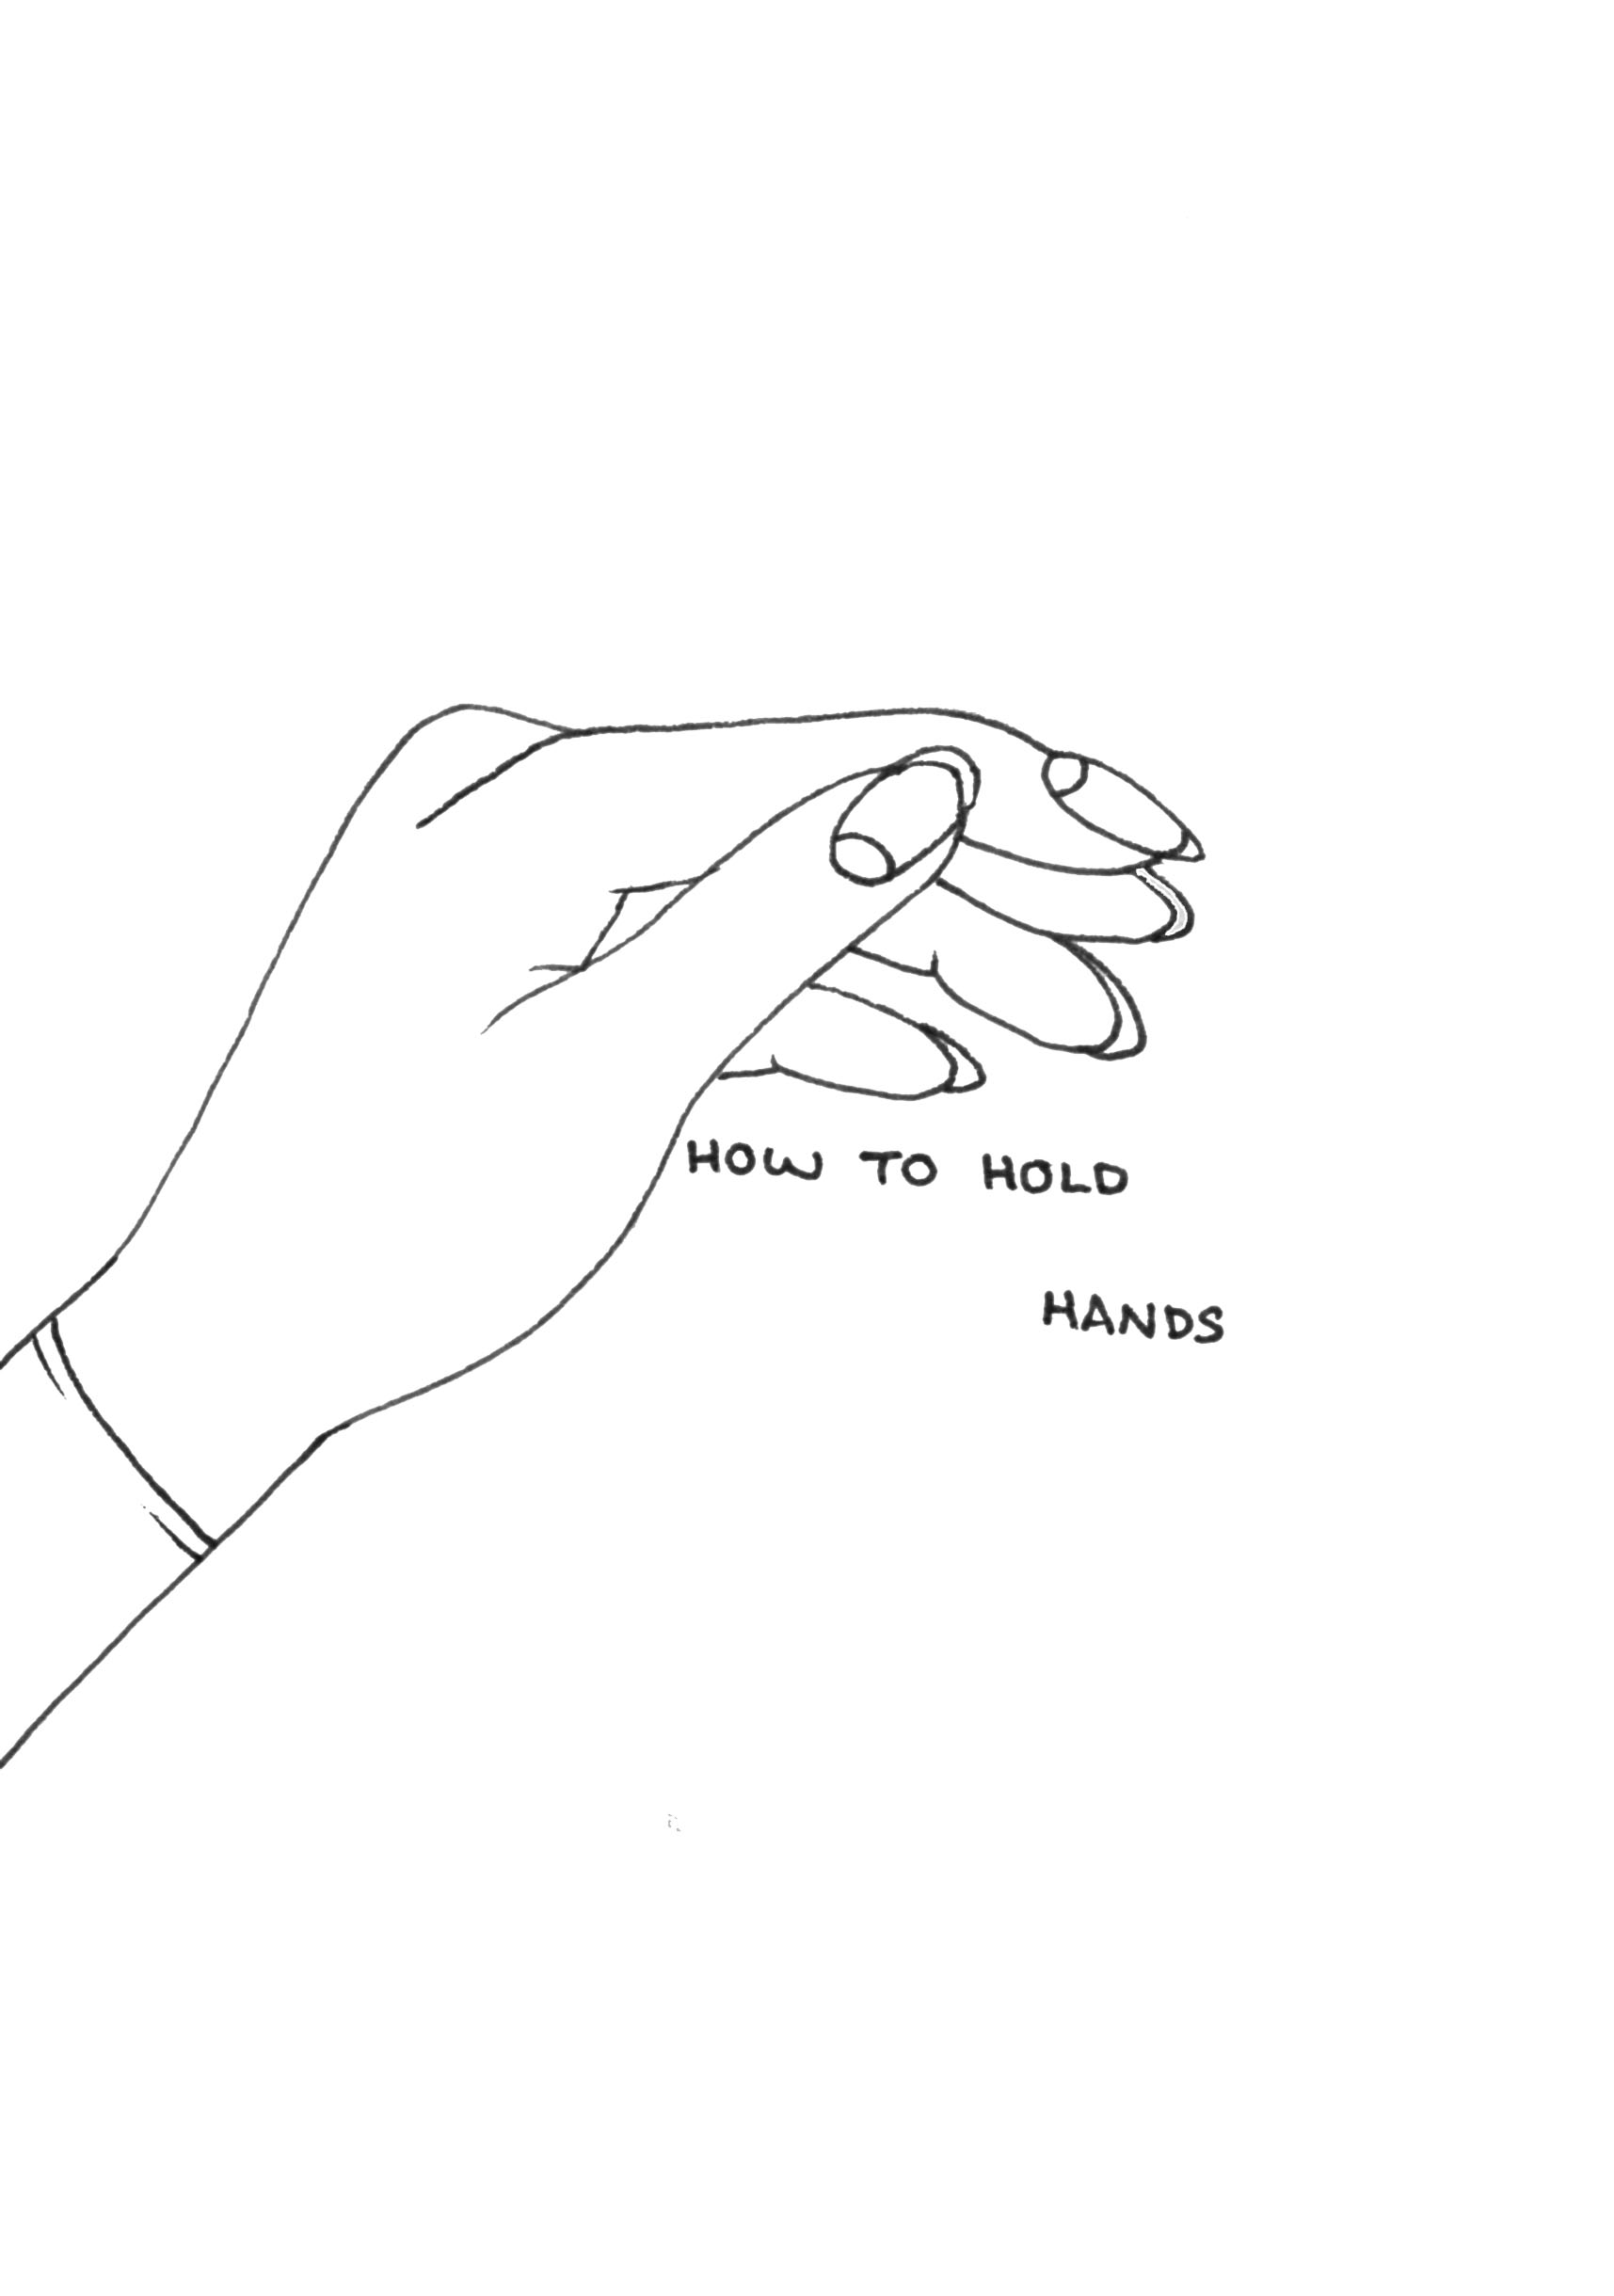 How to hold hands 3.jpeg